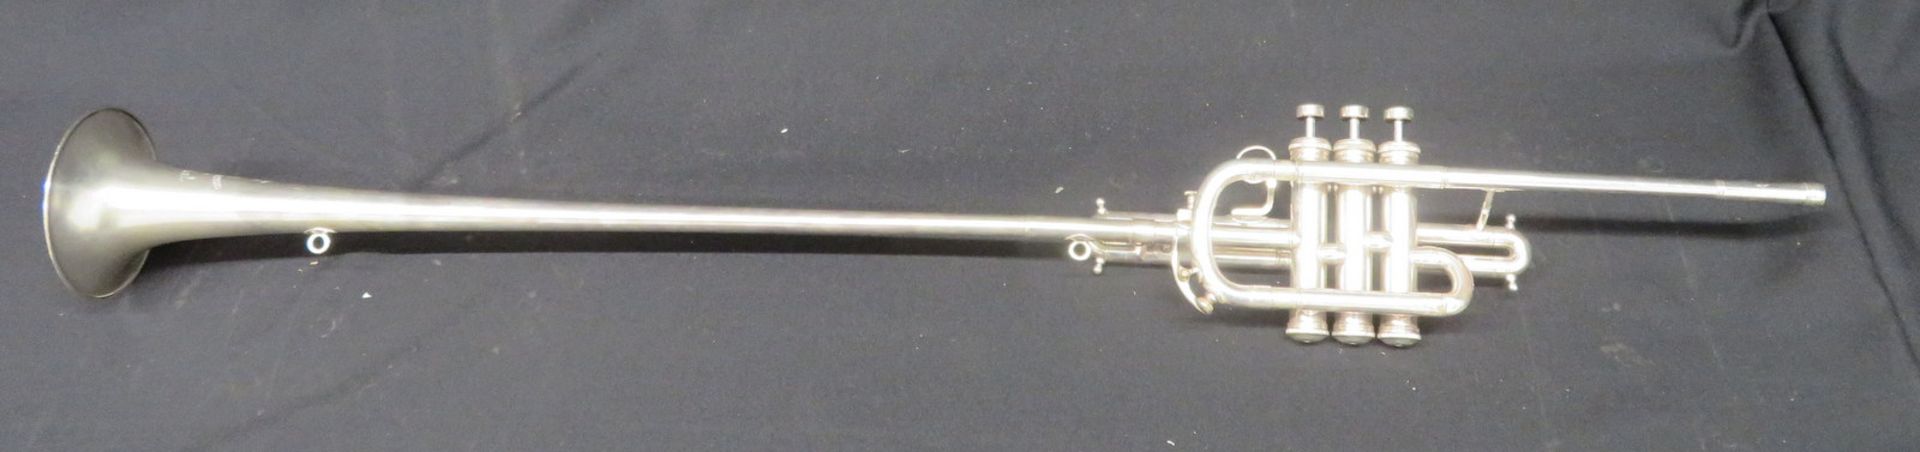 Boosey & Hawkes Imperial fanfare trumpet with case. Serial number: 514759. - Image 3 of 18